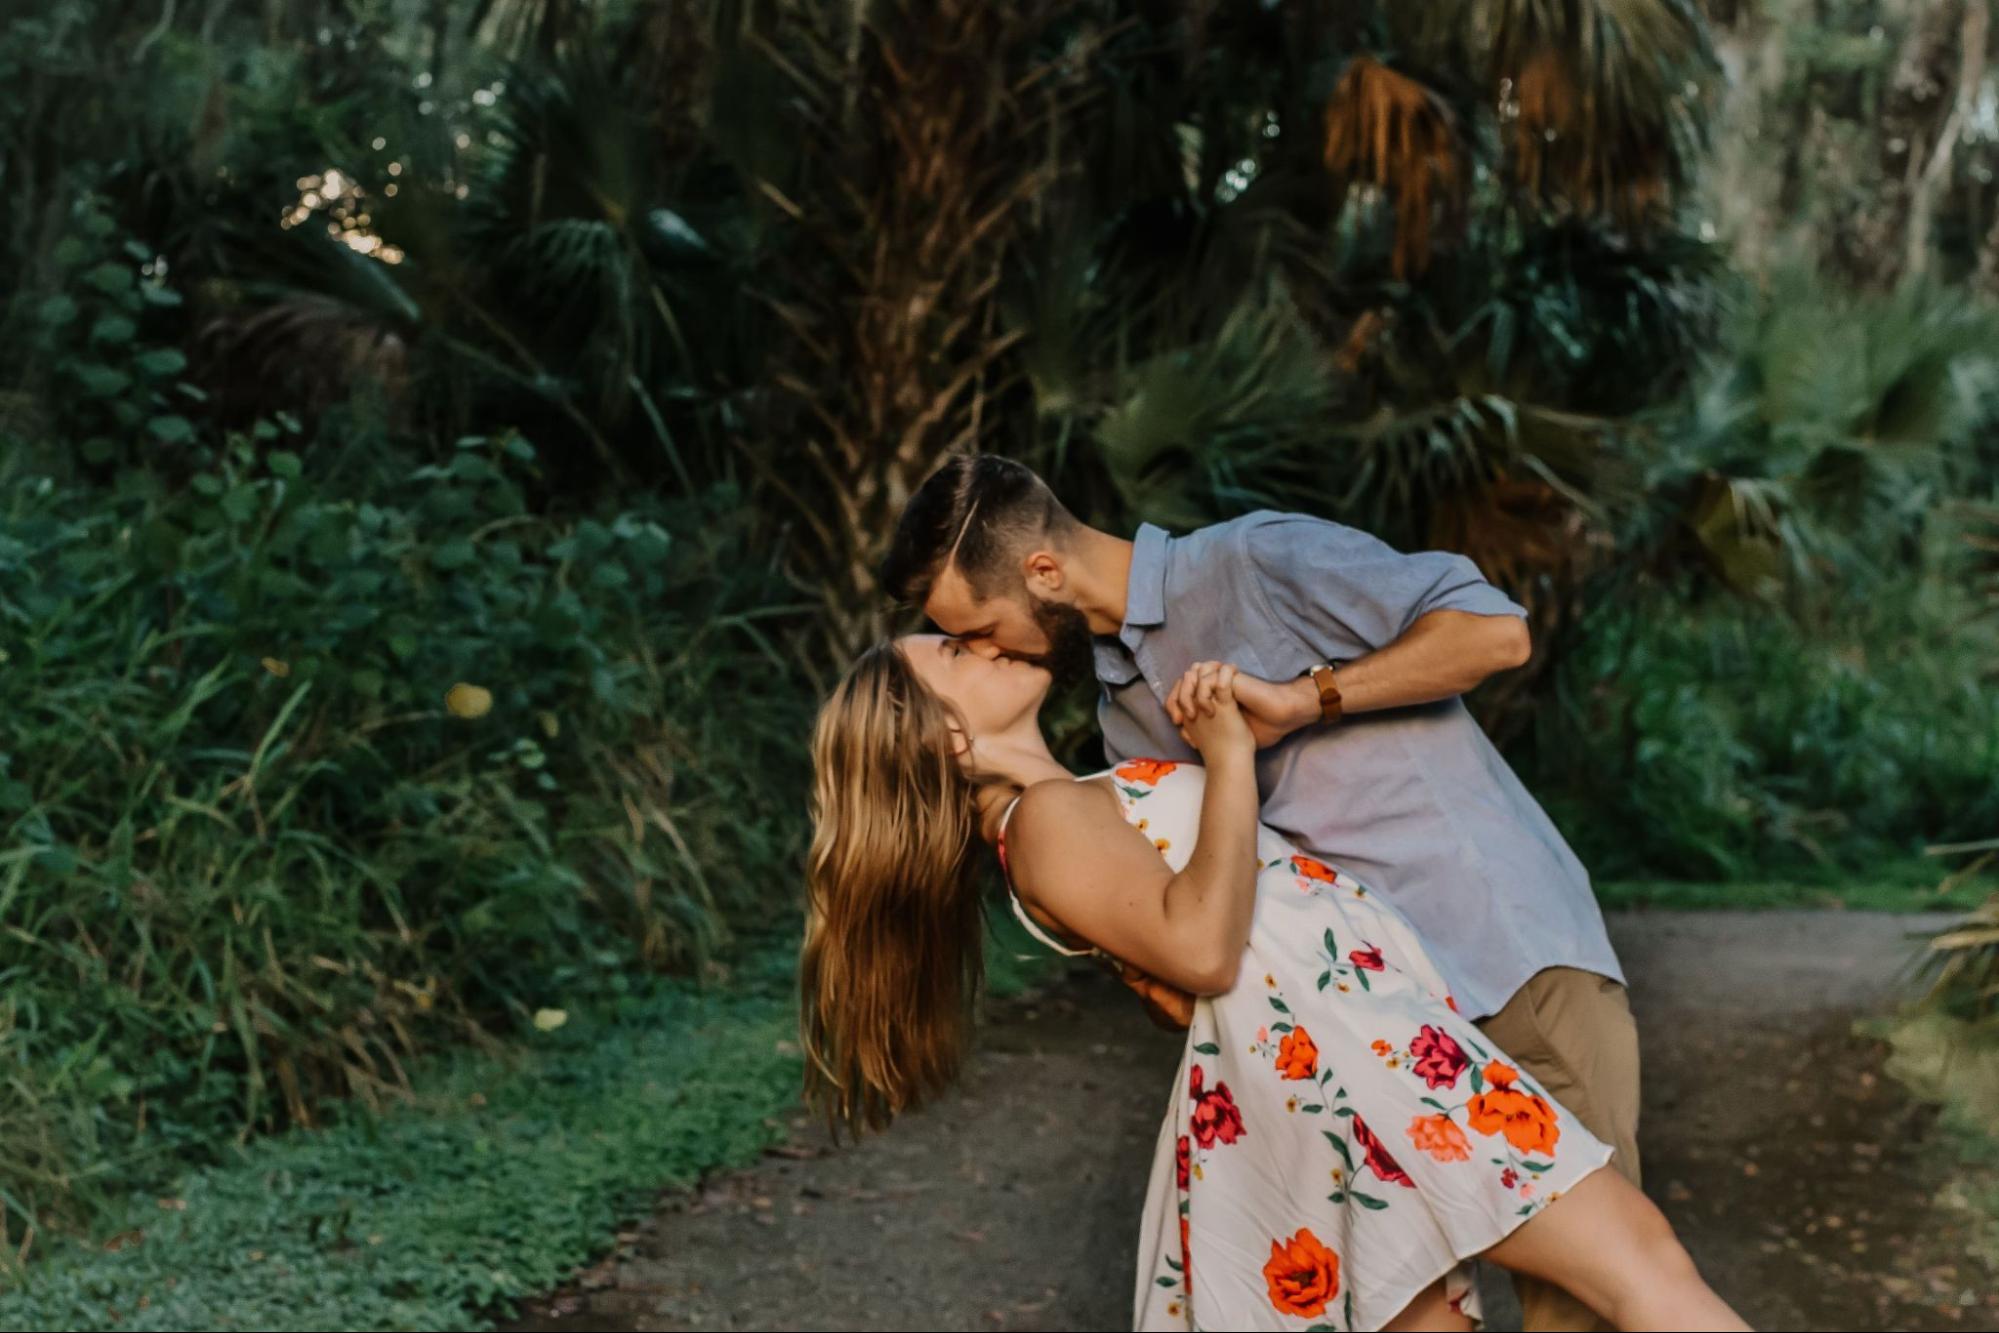 An engaged couple kisses on a narrow road in a tropical environment